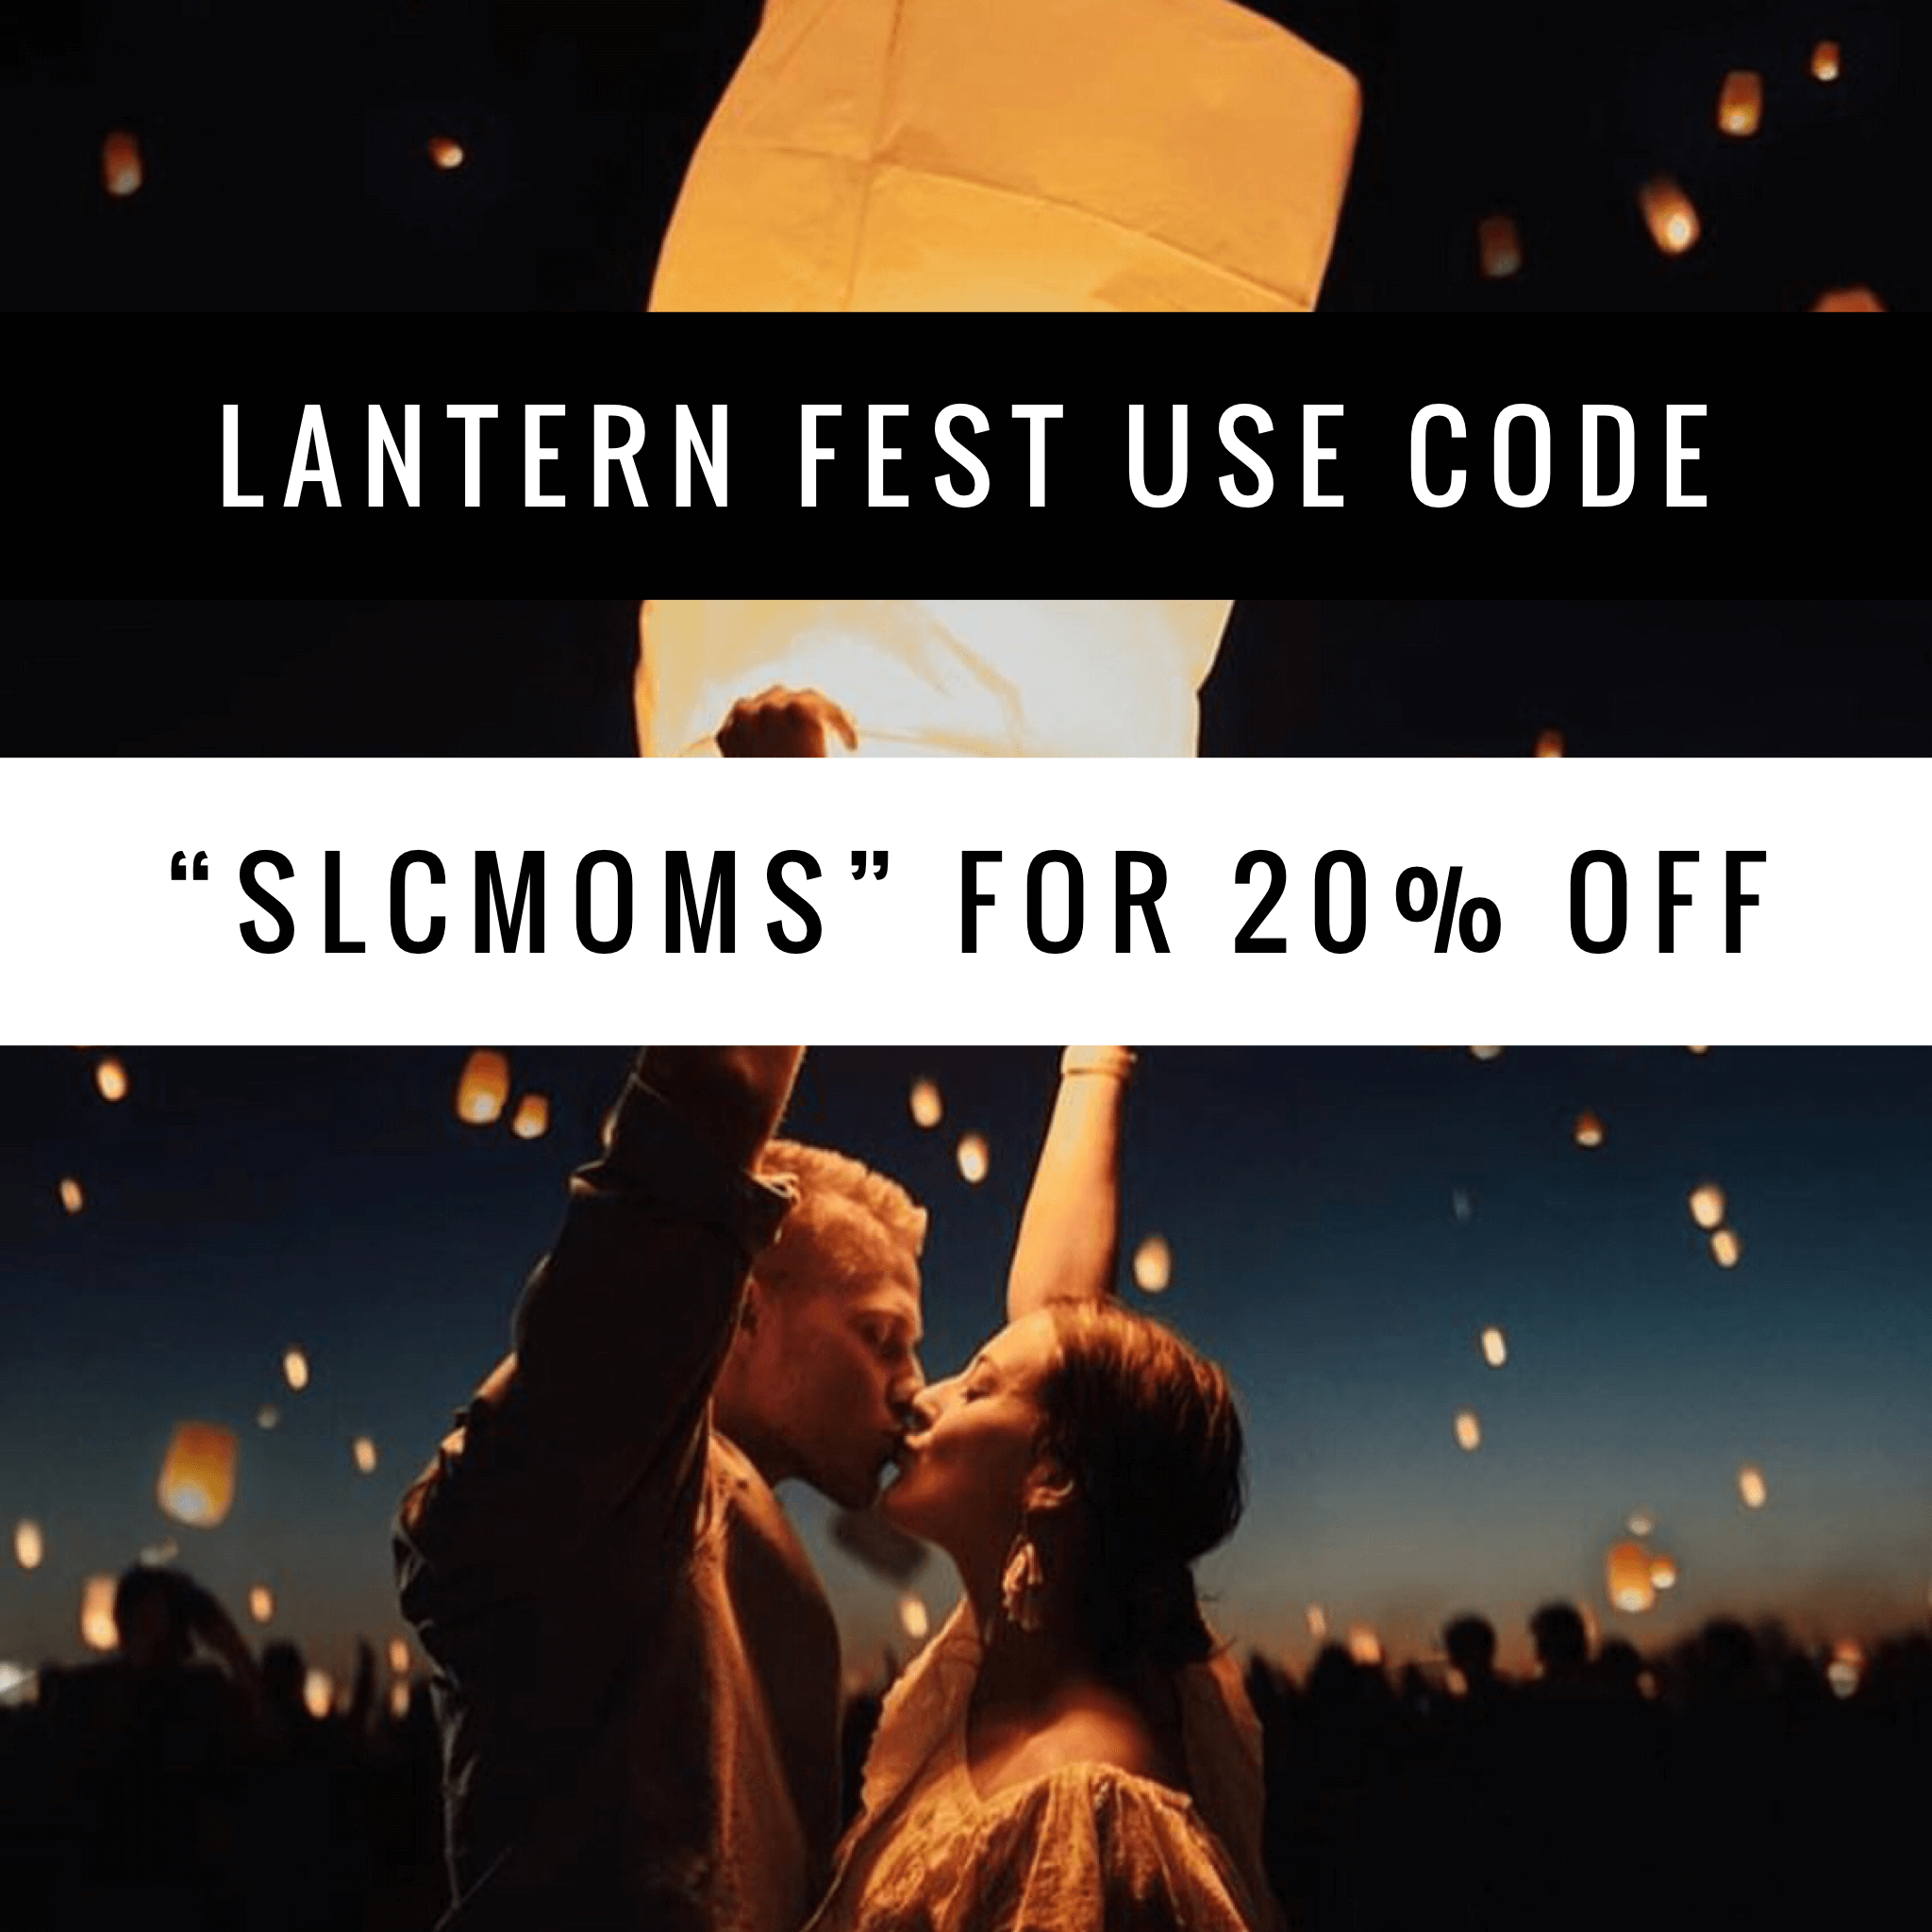 Lantern Fest Coupon Code & 10 Tips for the Best Experience SLC MOMS